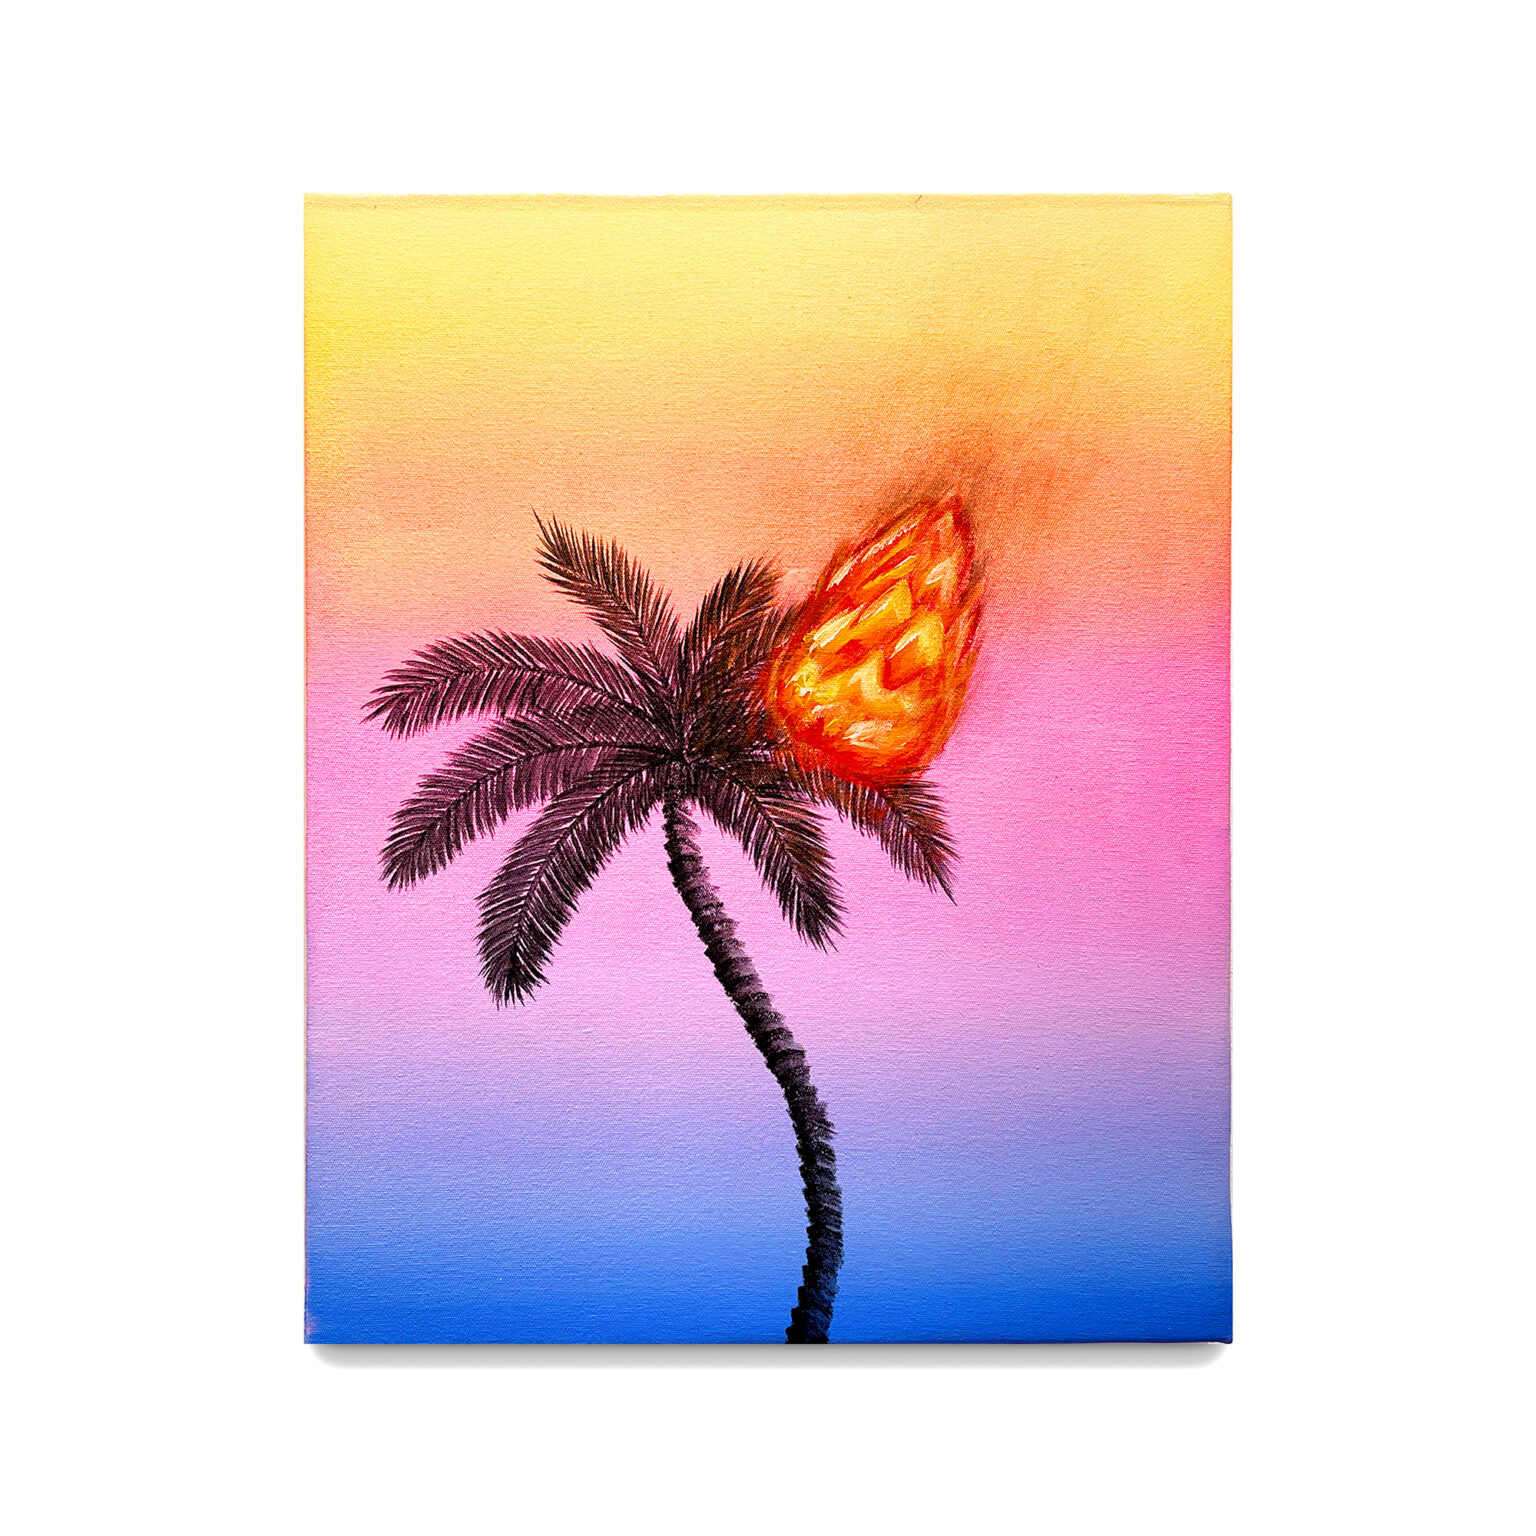 WESERHALLE-Andy-Kassier-burning-palm-tree-#3